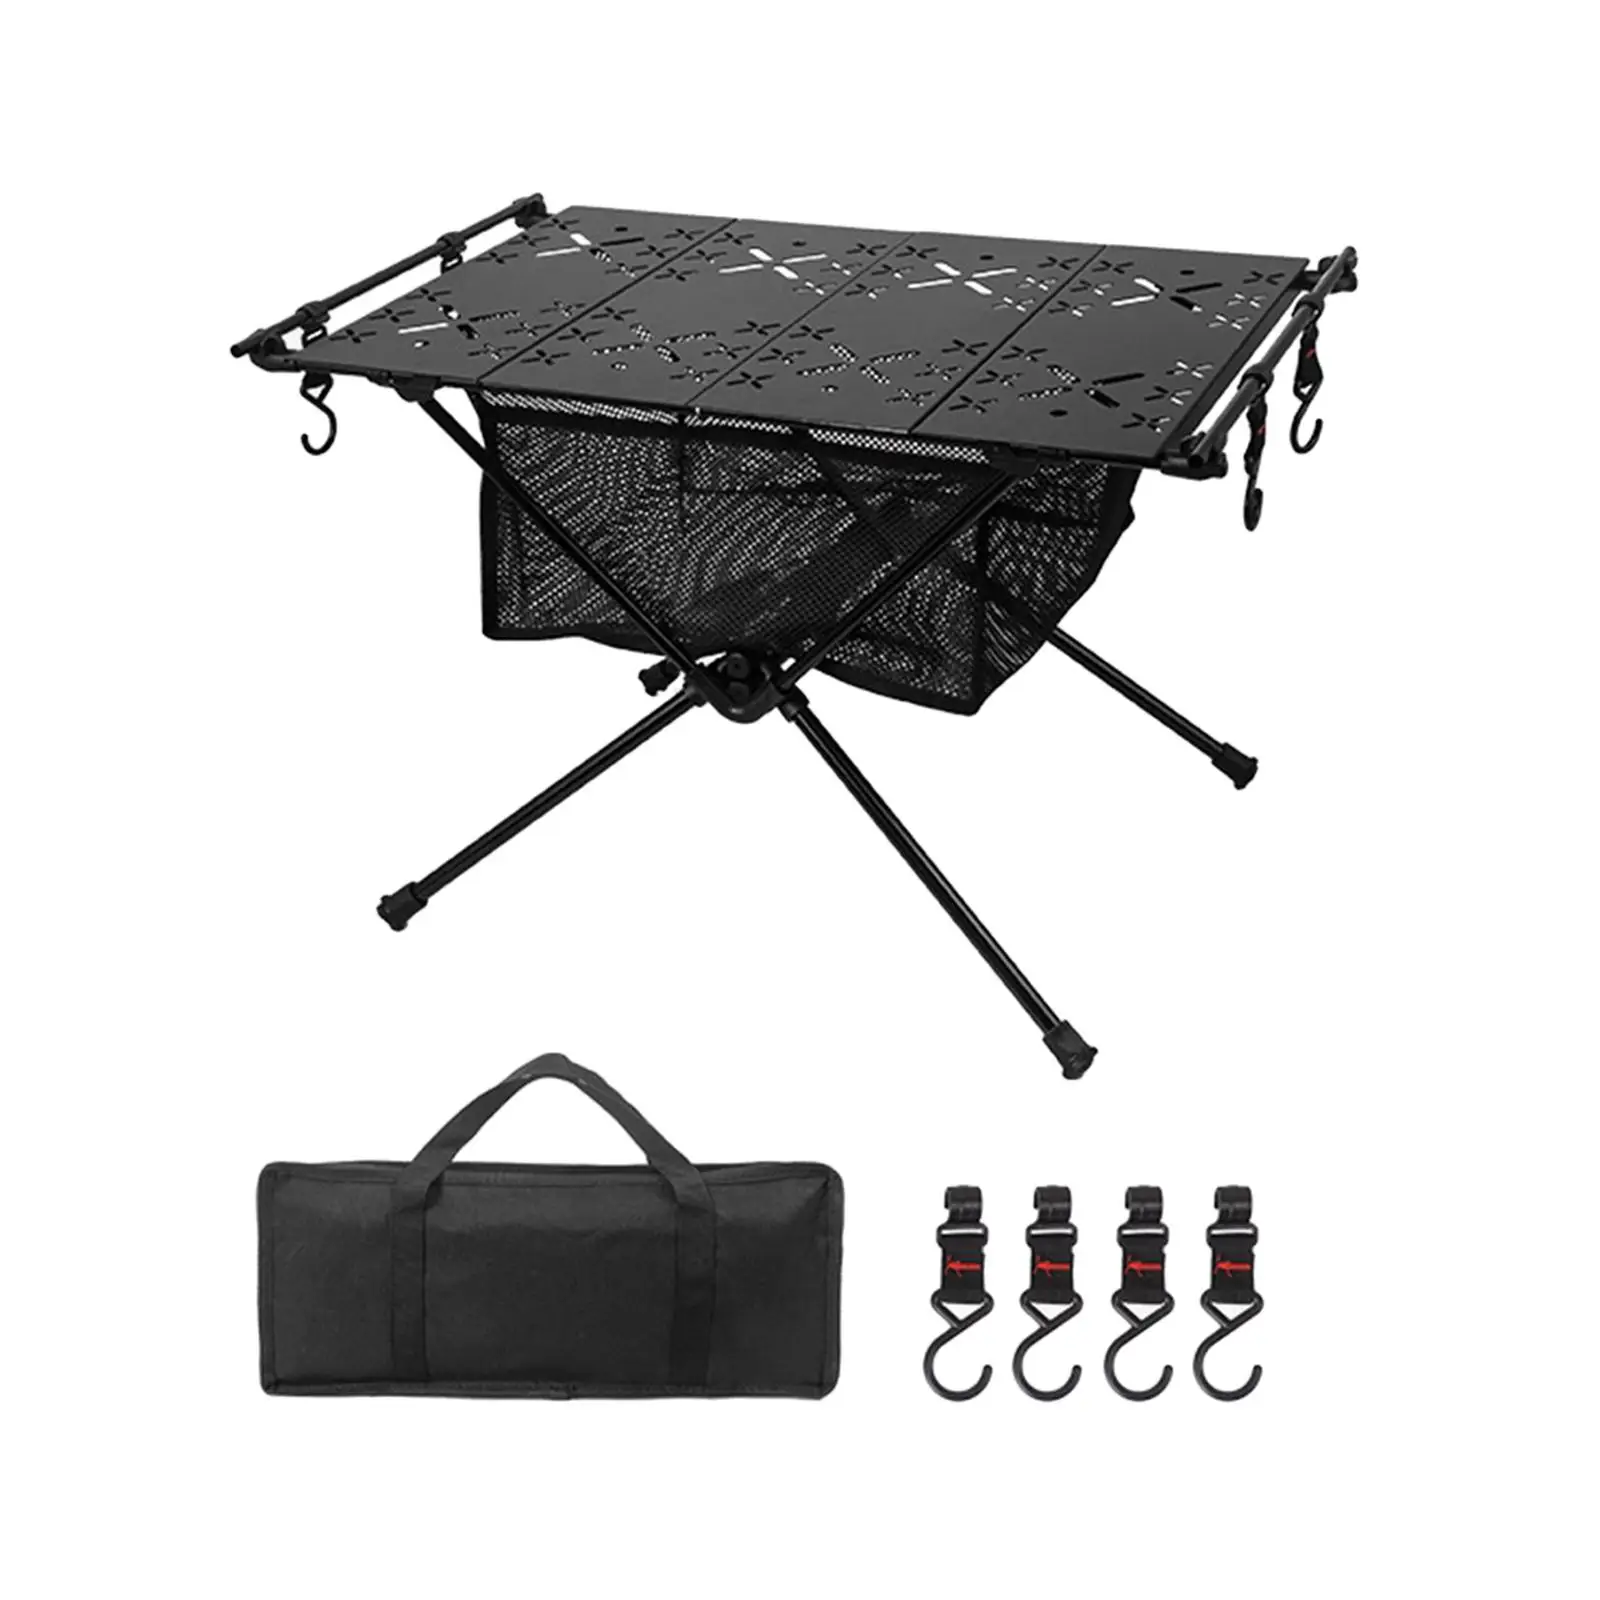 Folding Camping Table Camping Desk Camp Table Lightweight Outdoor Table Beach Table for Backyard Picnic Garden Hiking Fishing